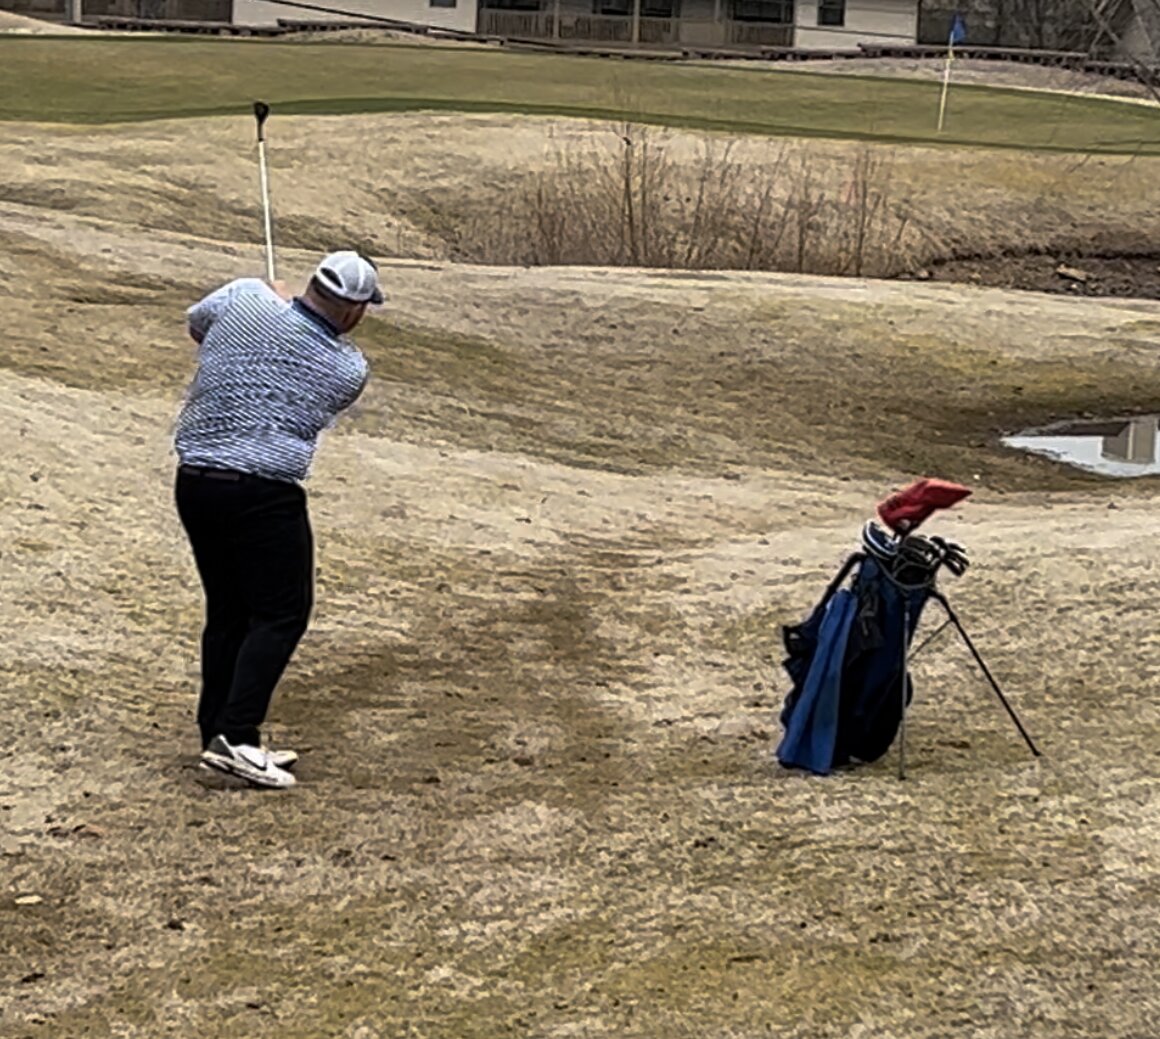 Senior Daniel Minton from Marshfield is pictured just as he swings during last week's golf tournament at Pointe Royale.